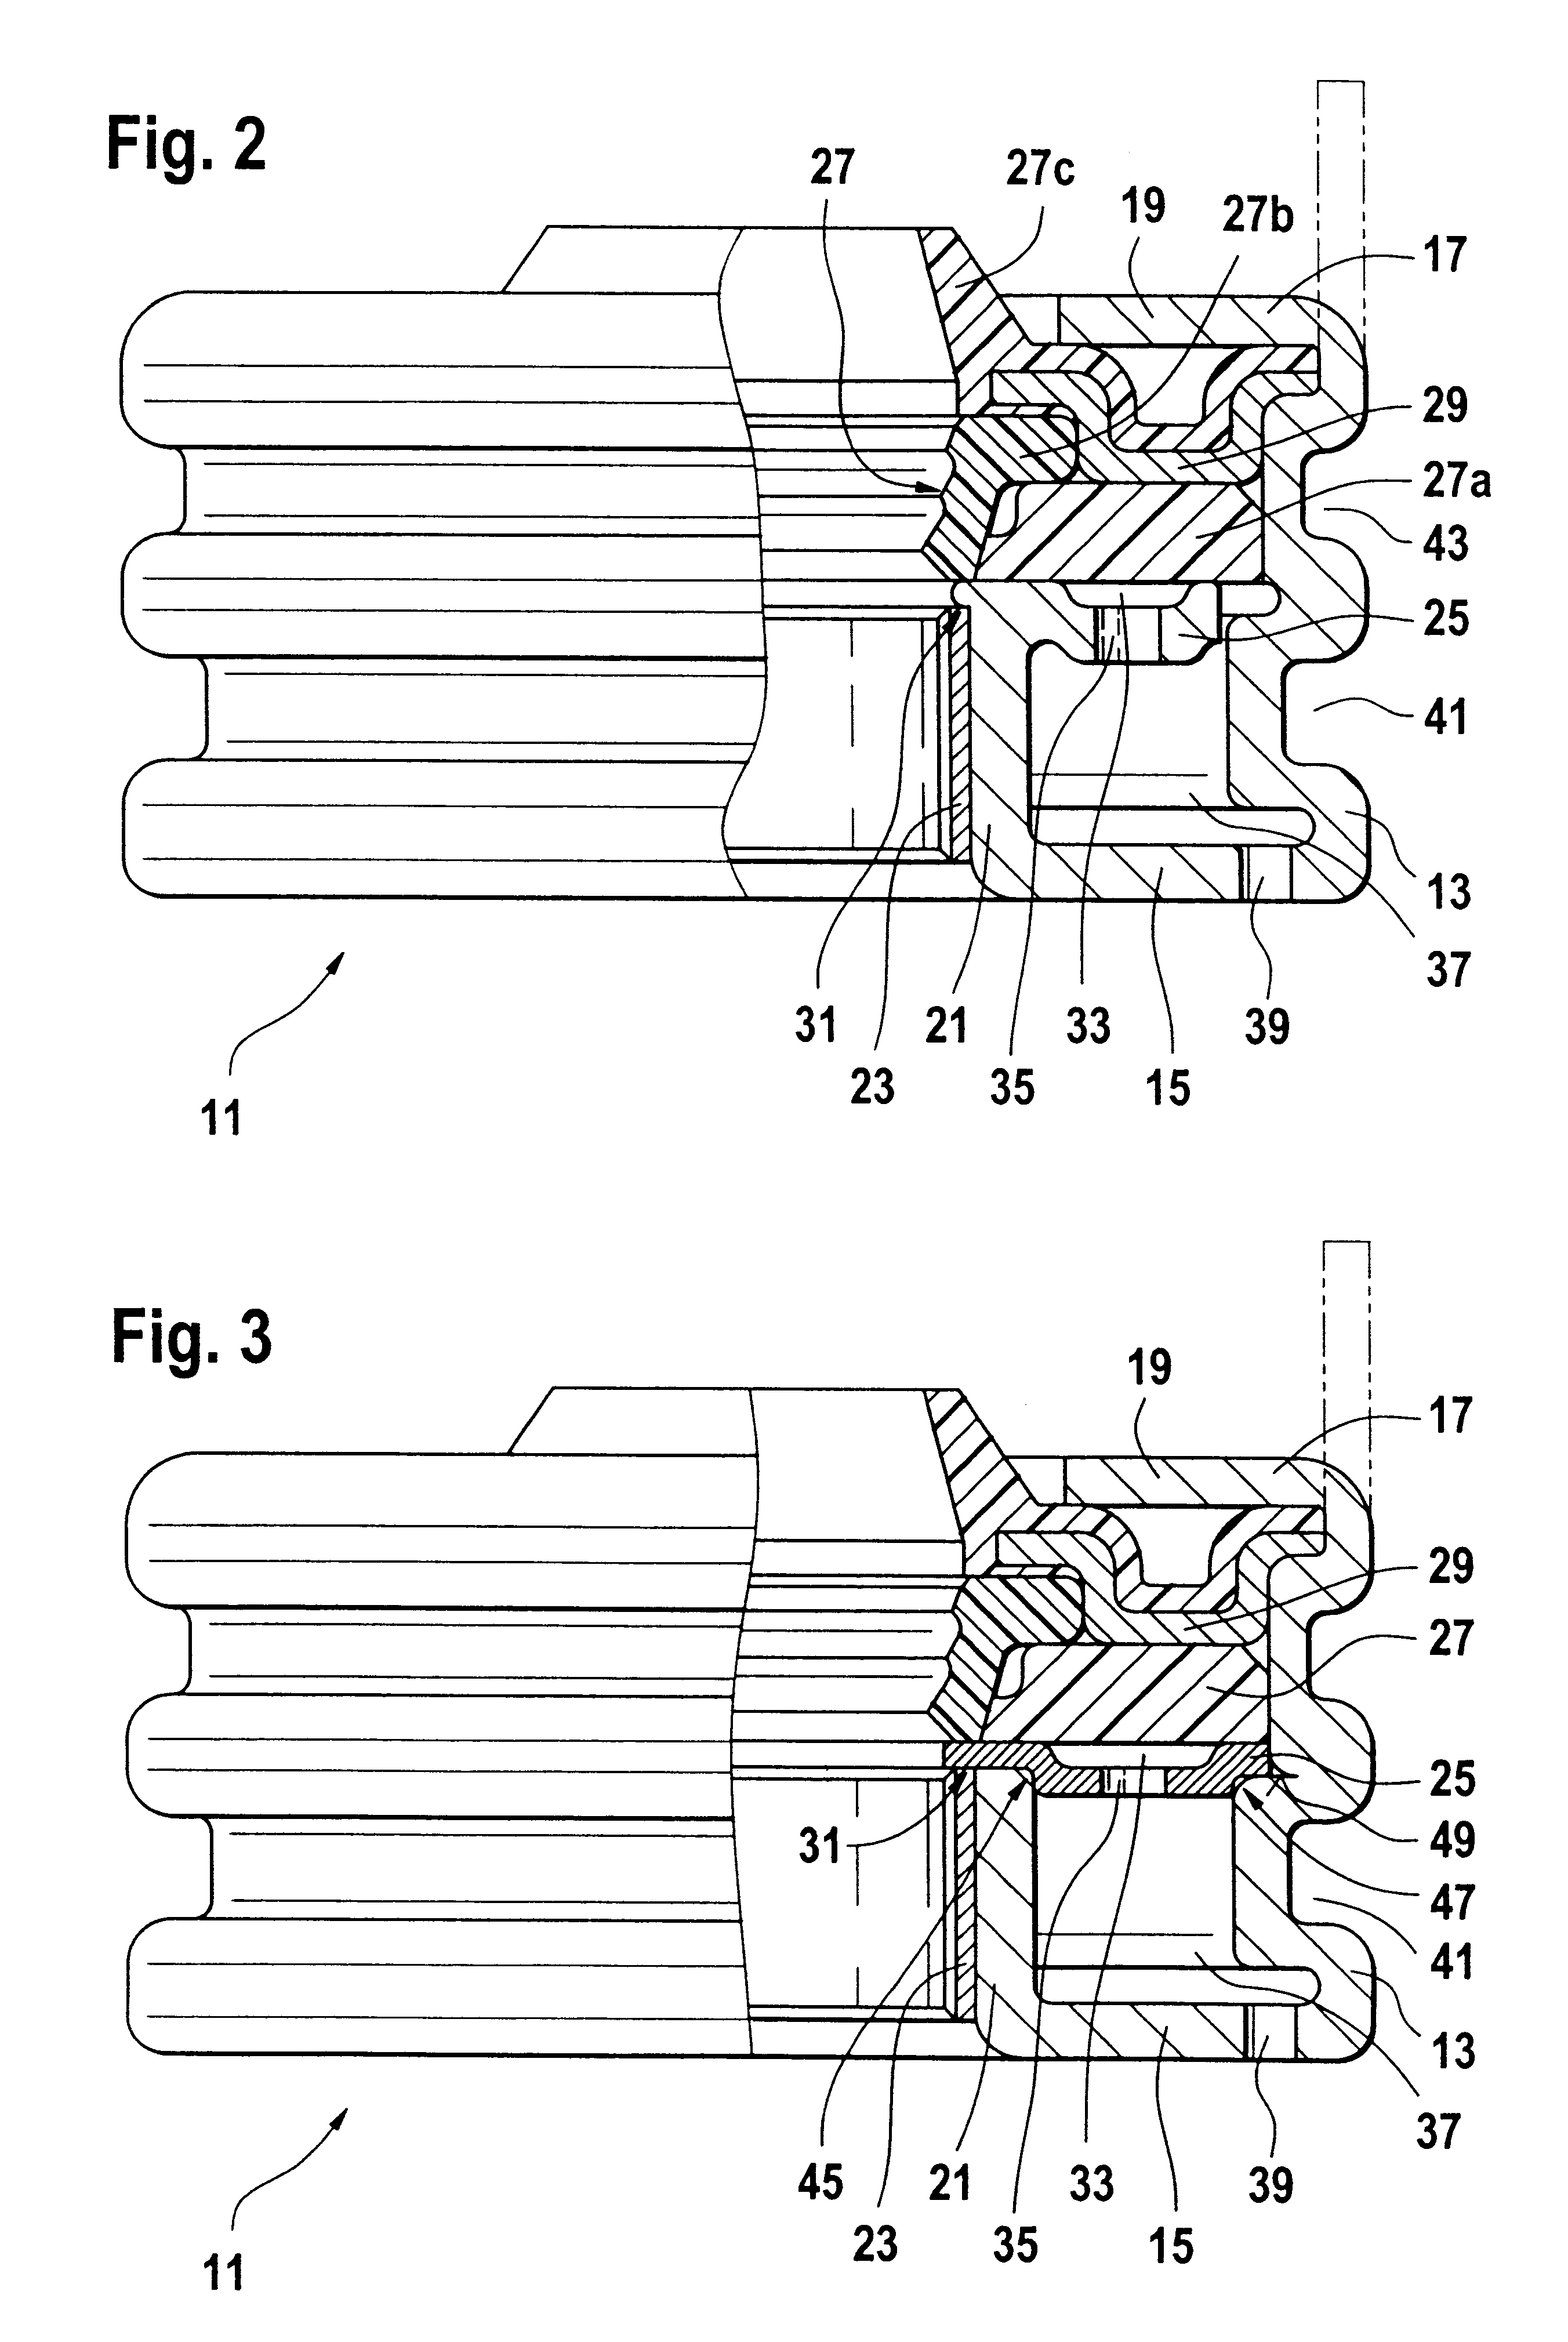 Piston rod guide for a piston-cylinder unit